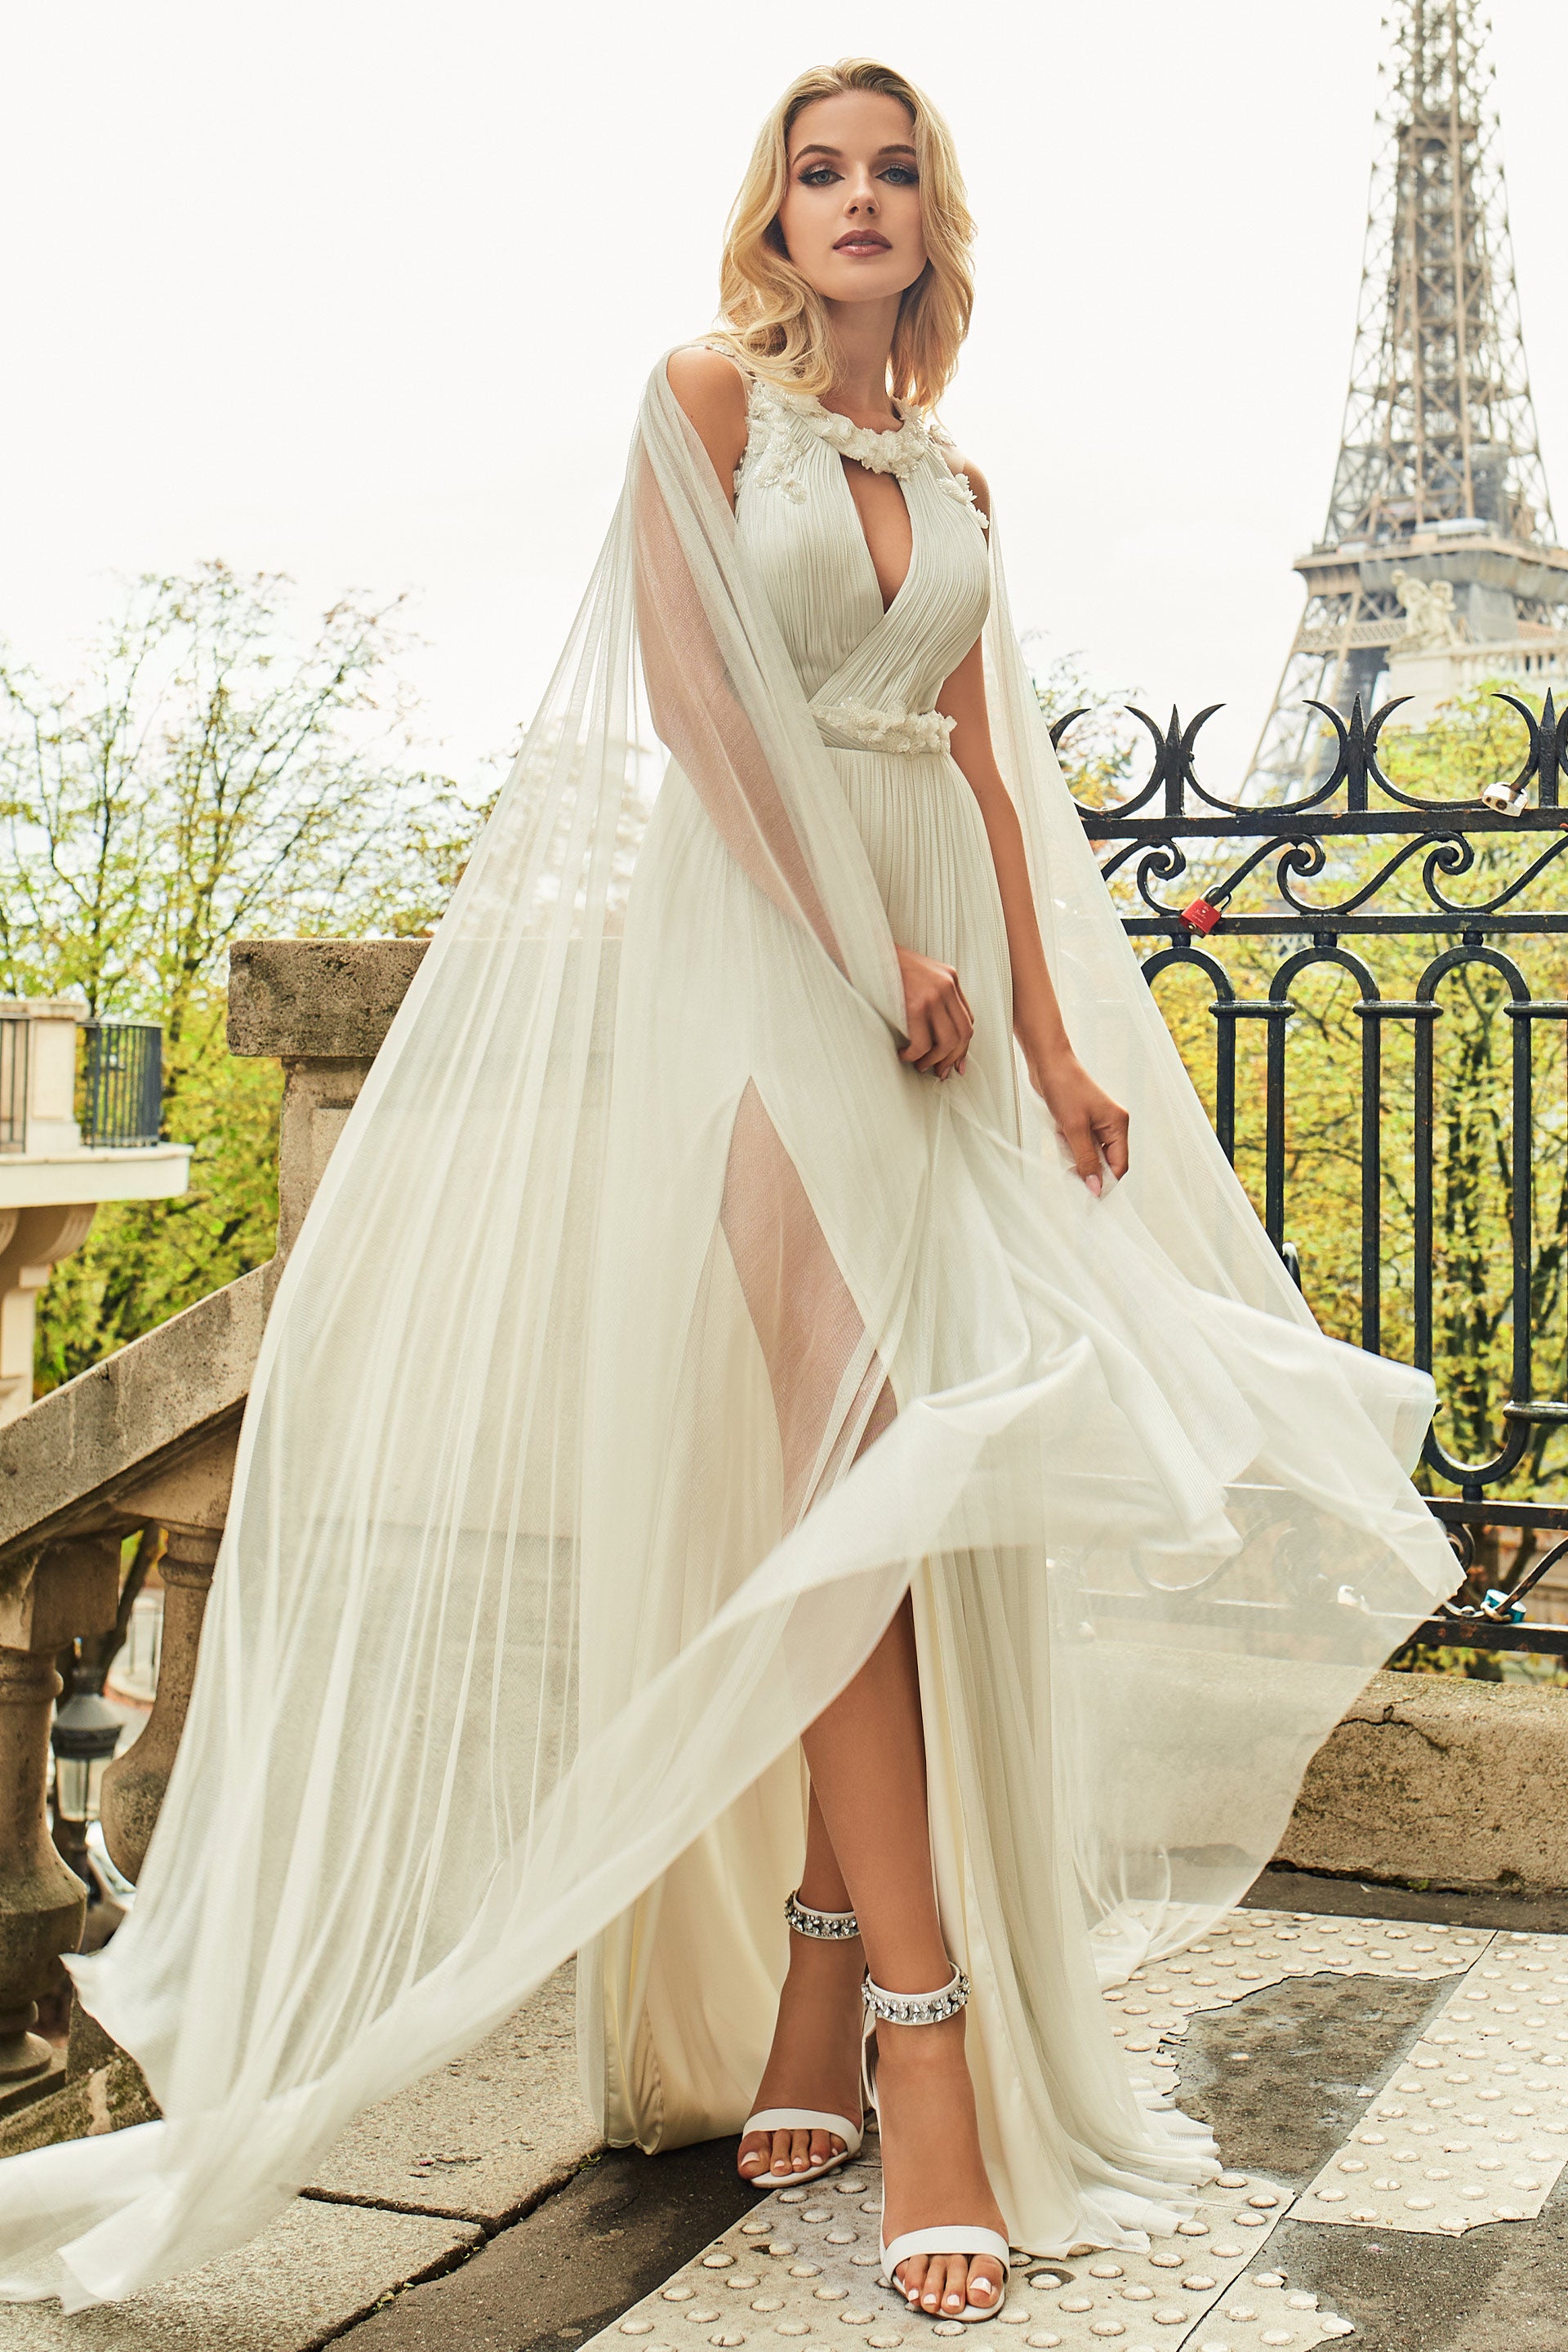 Amarose Bridal Dress Embellished with Crystals and Pearls - Blini